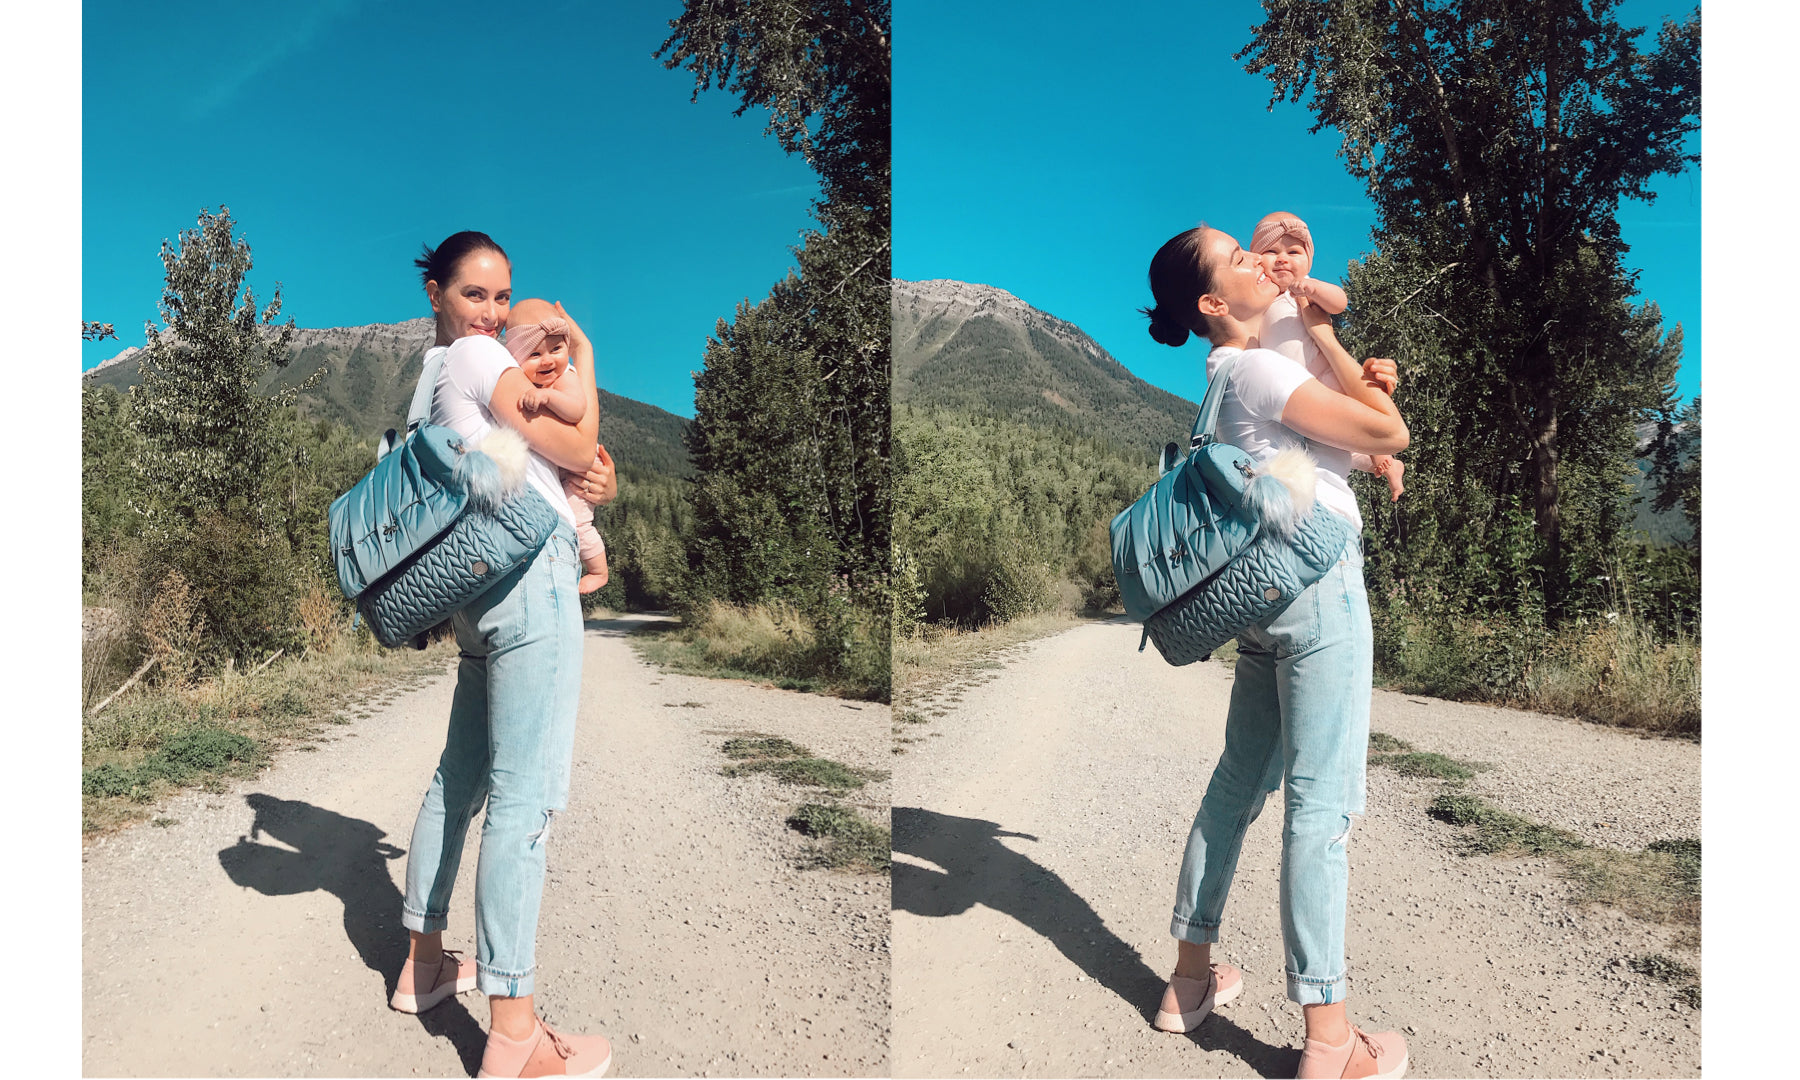 Miss Universe Canada Siera Bearchell: "I Have Found the Perfect Diaper Bag"